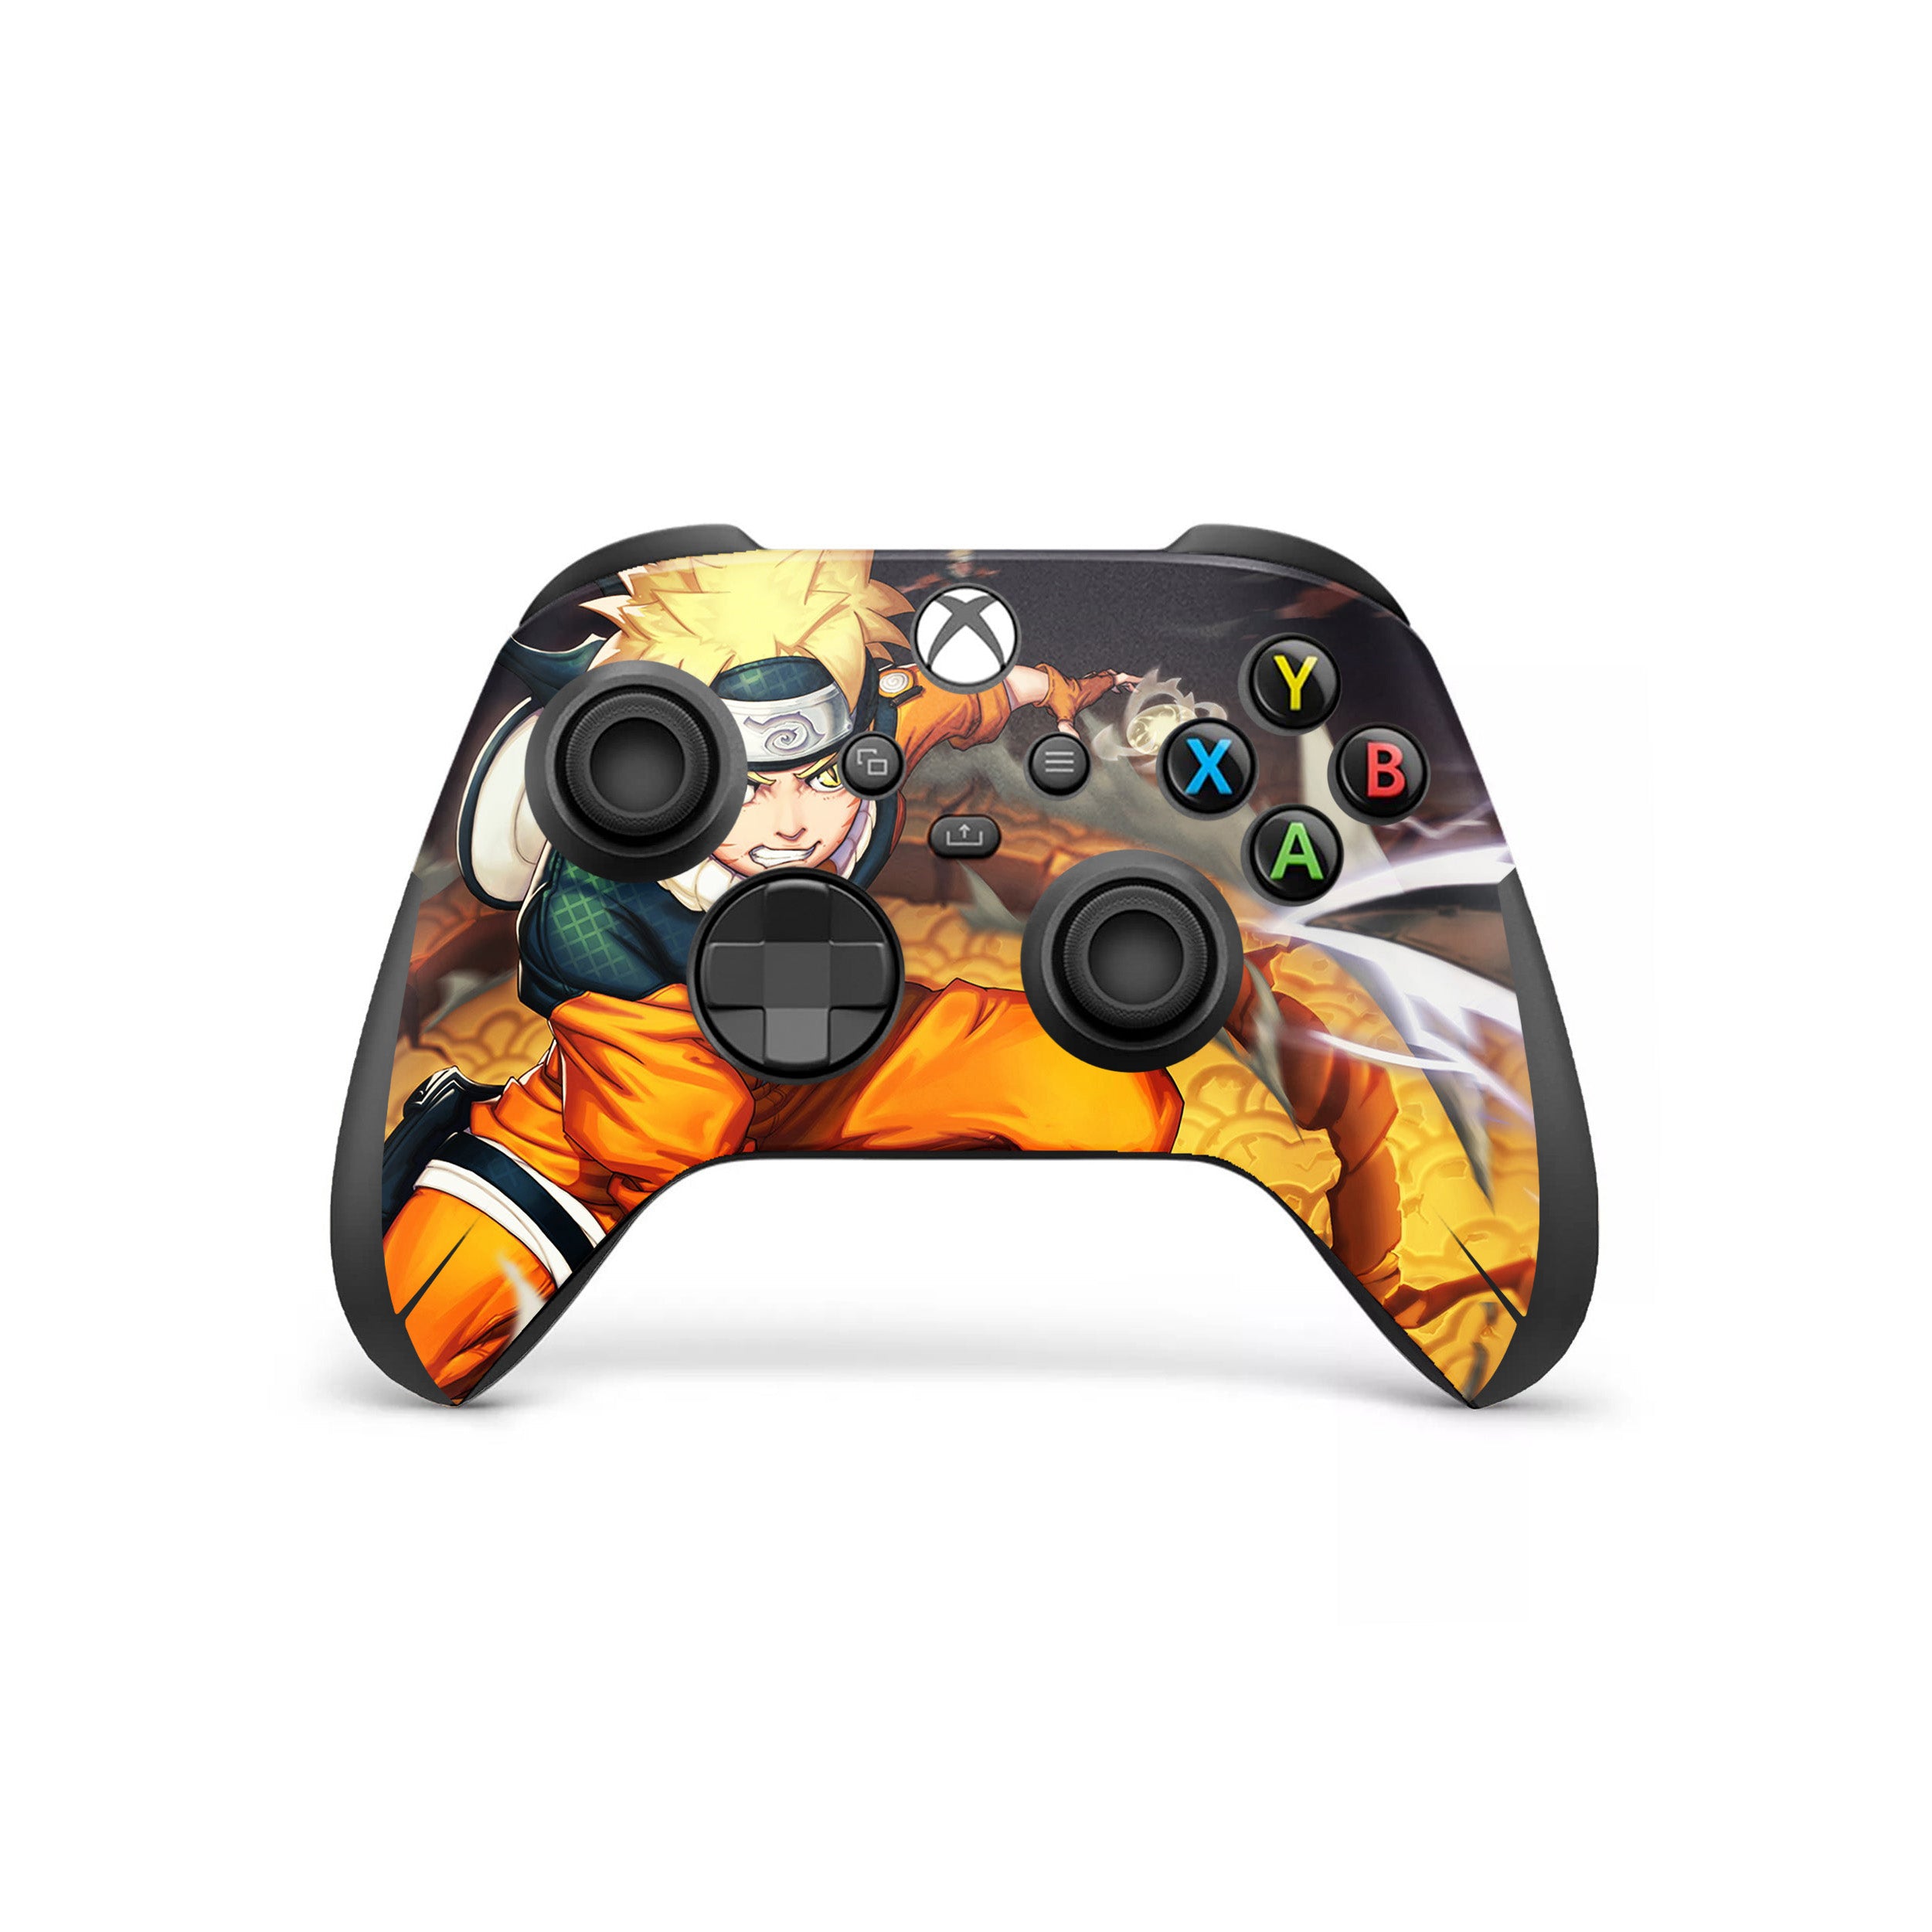 A video game skin featuring a Naruto design for the Xbox Wireless Controller.